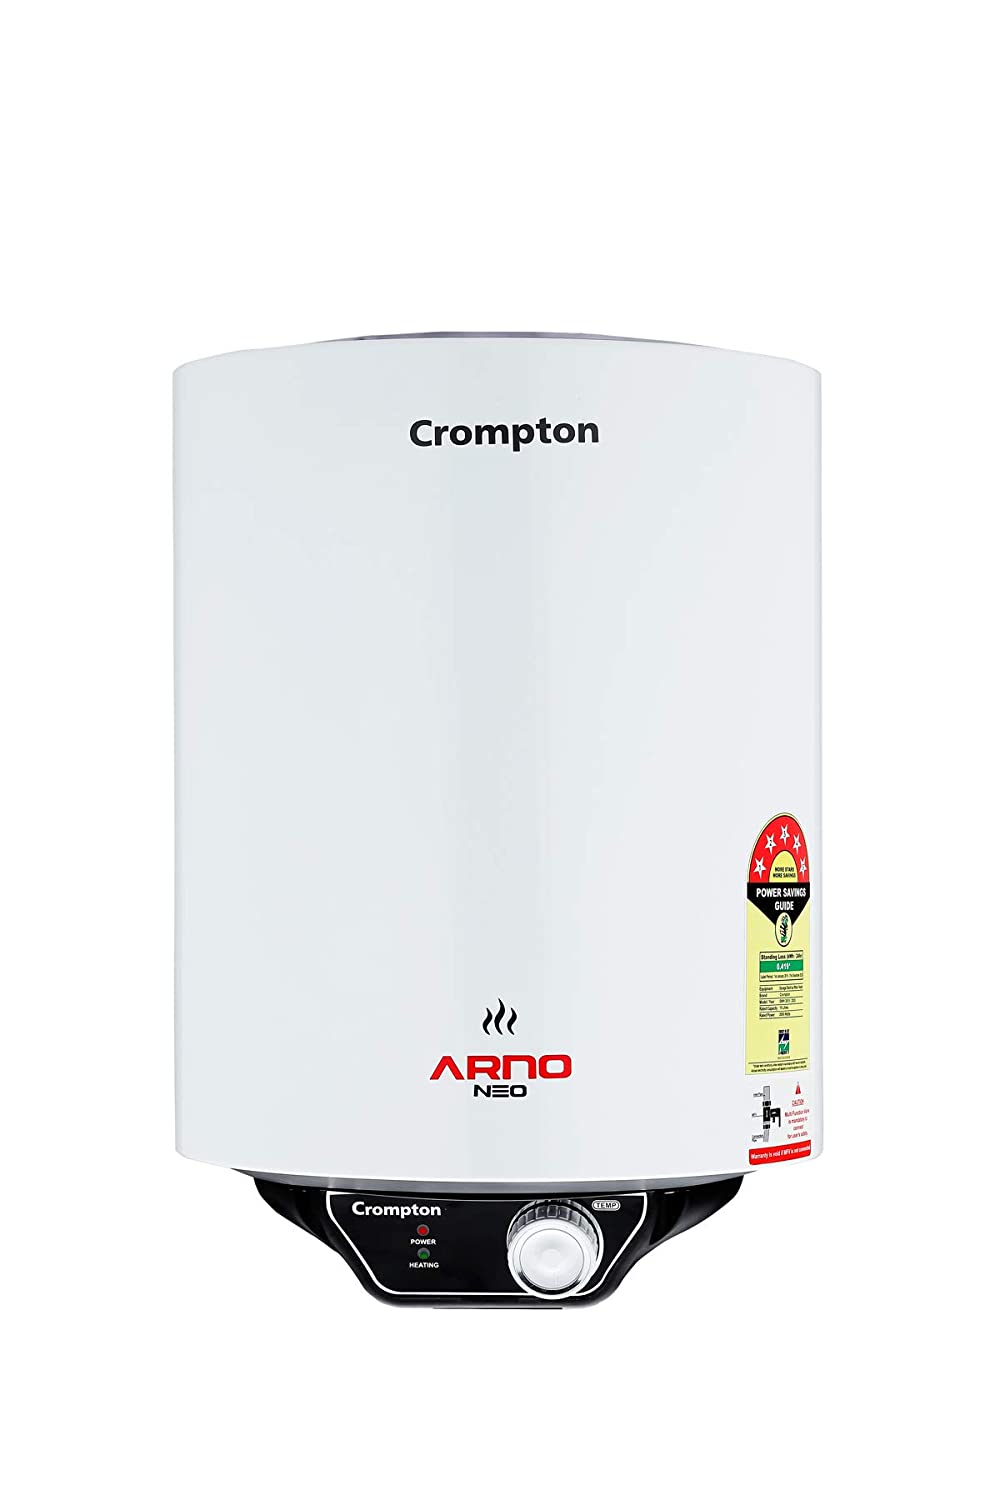 Crompton Arno Neo ASWH-3015 15-litres 5 Star-Rated Storage Water Heater